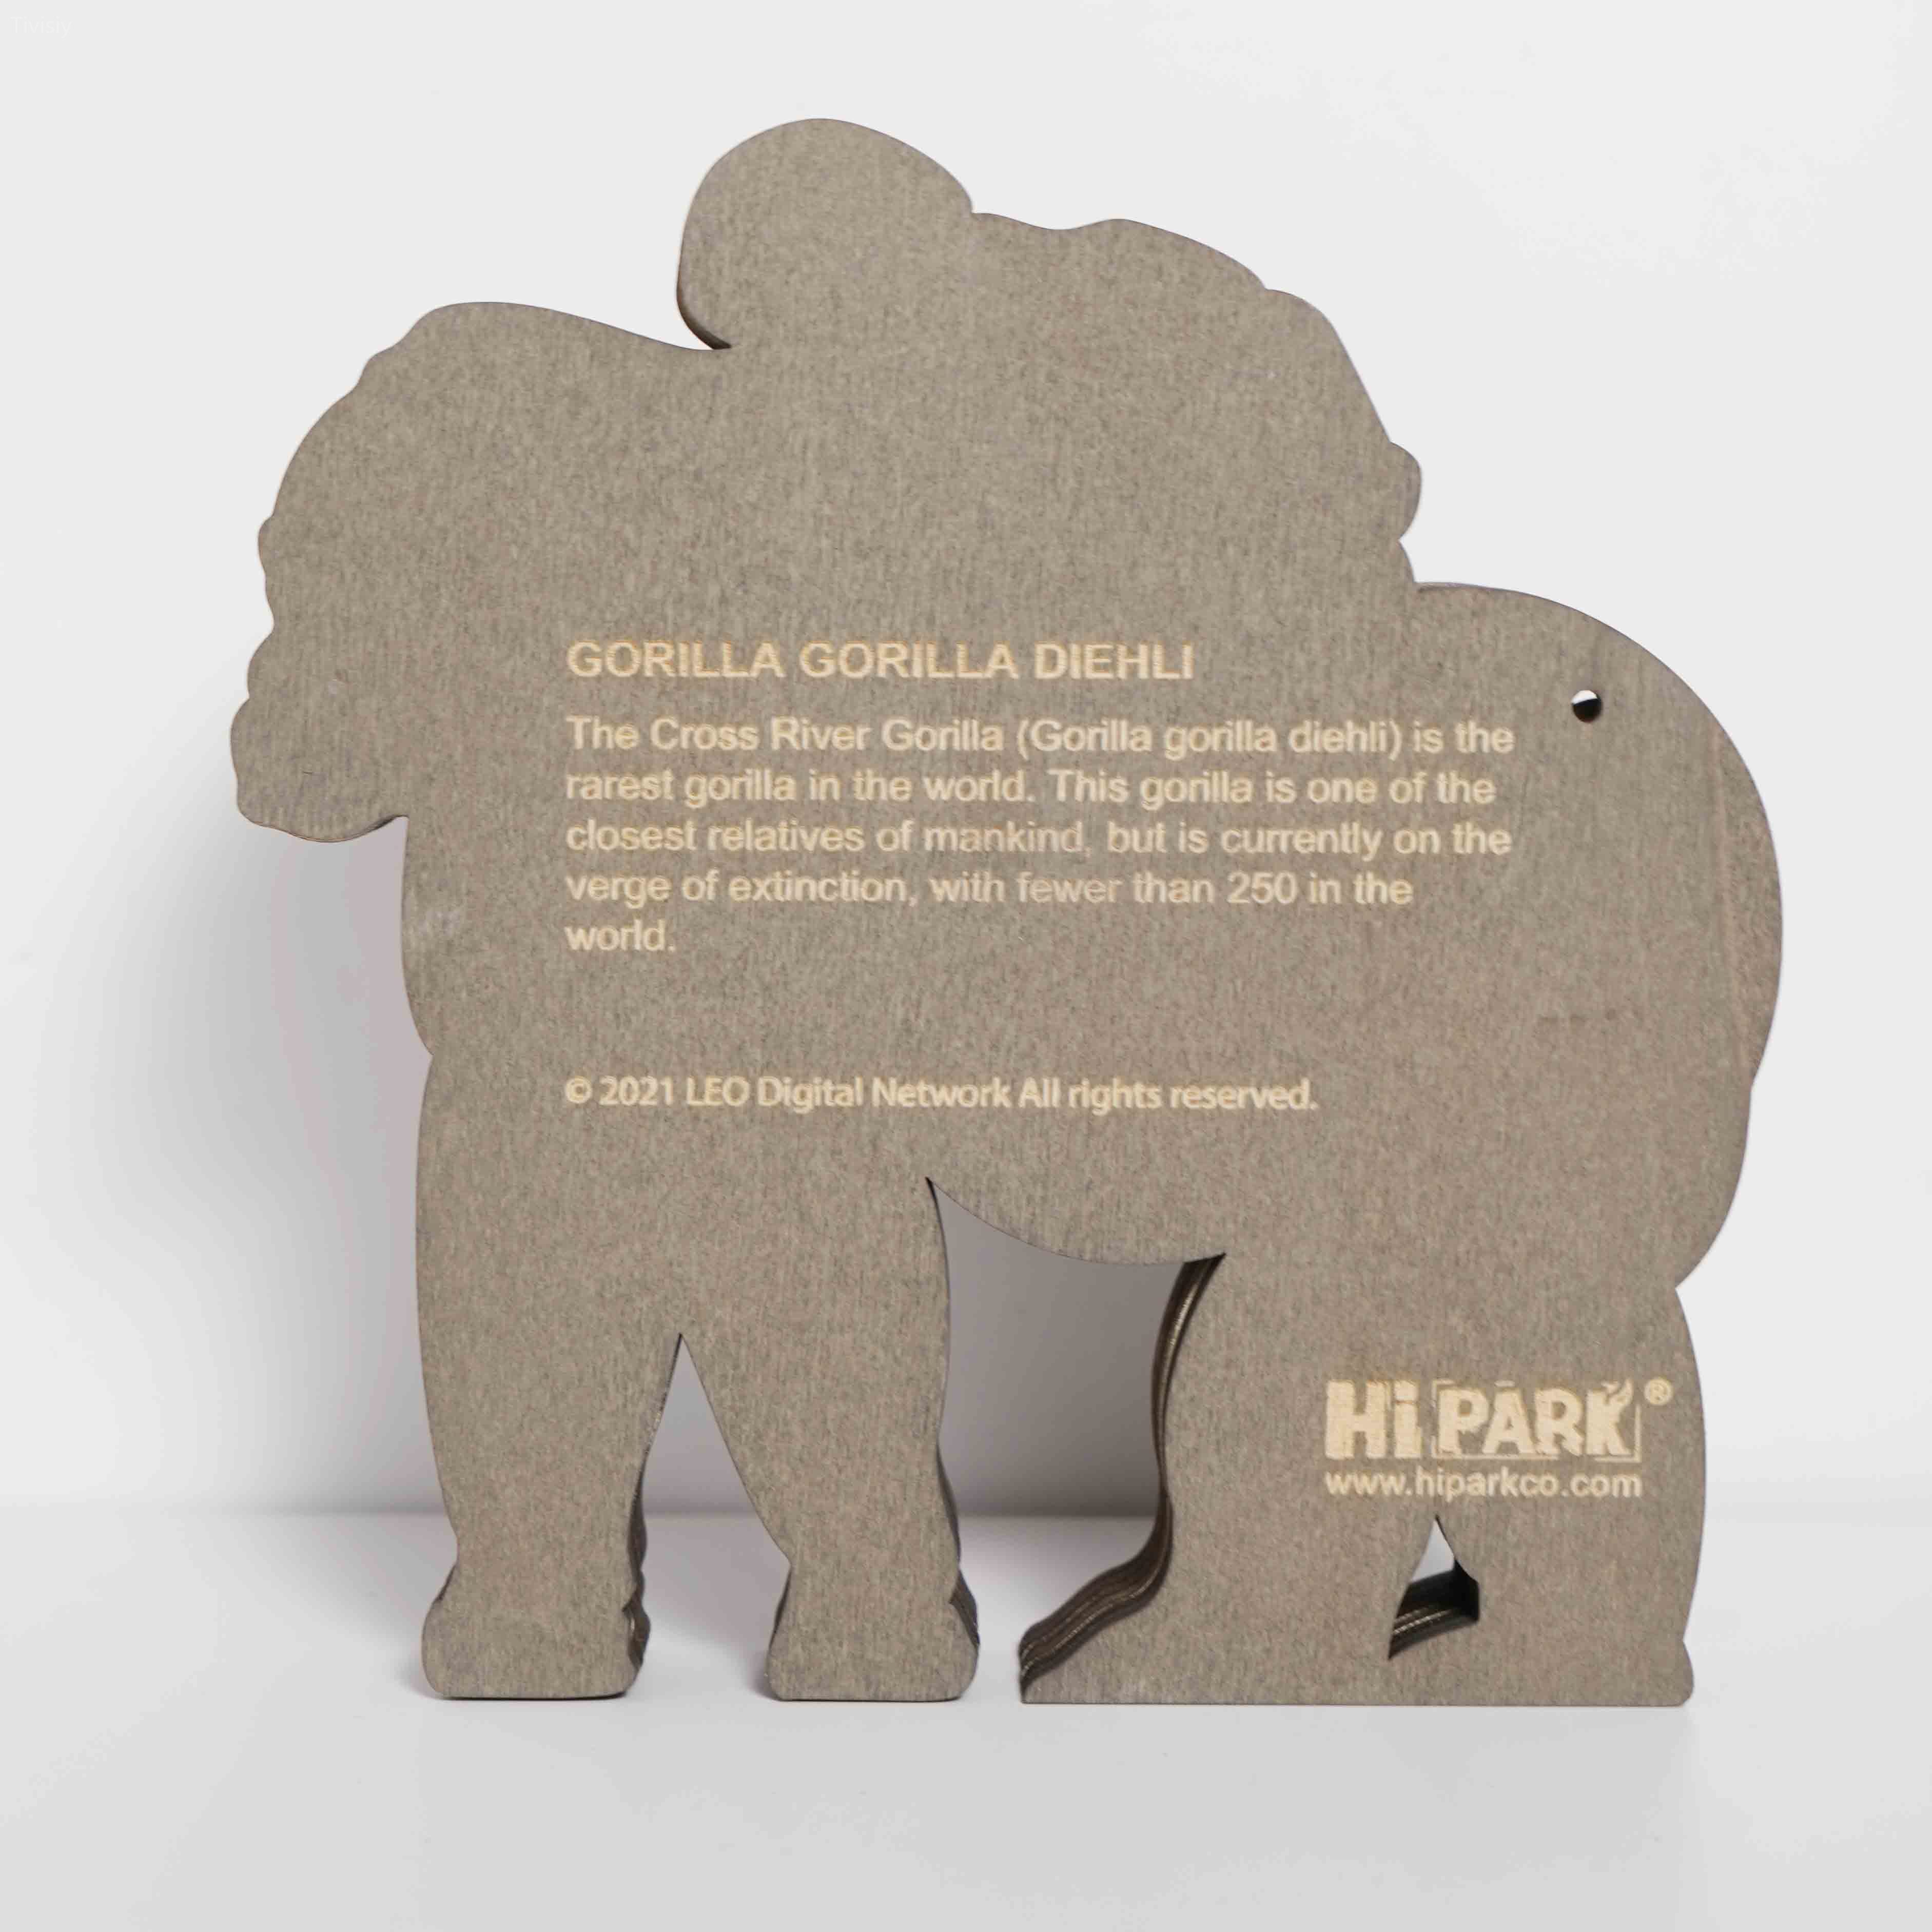 Gorilla Gorilla Diehli Wooden Carving,Suitable for Home Decoration,Holiday Gift